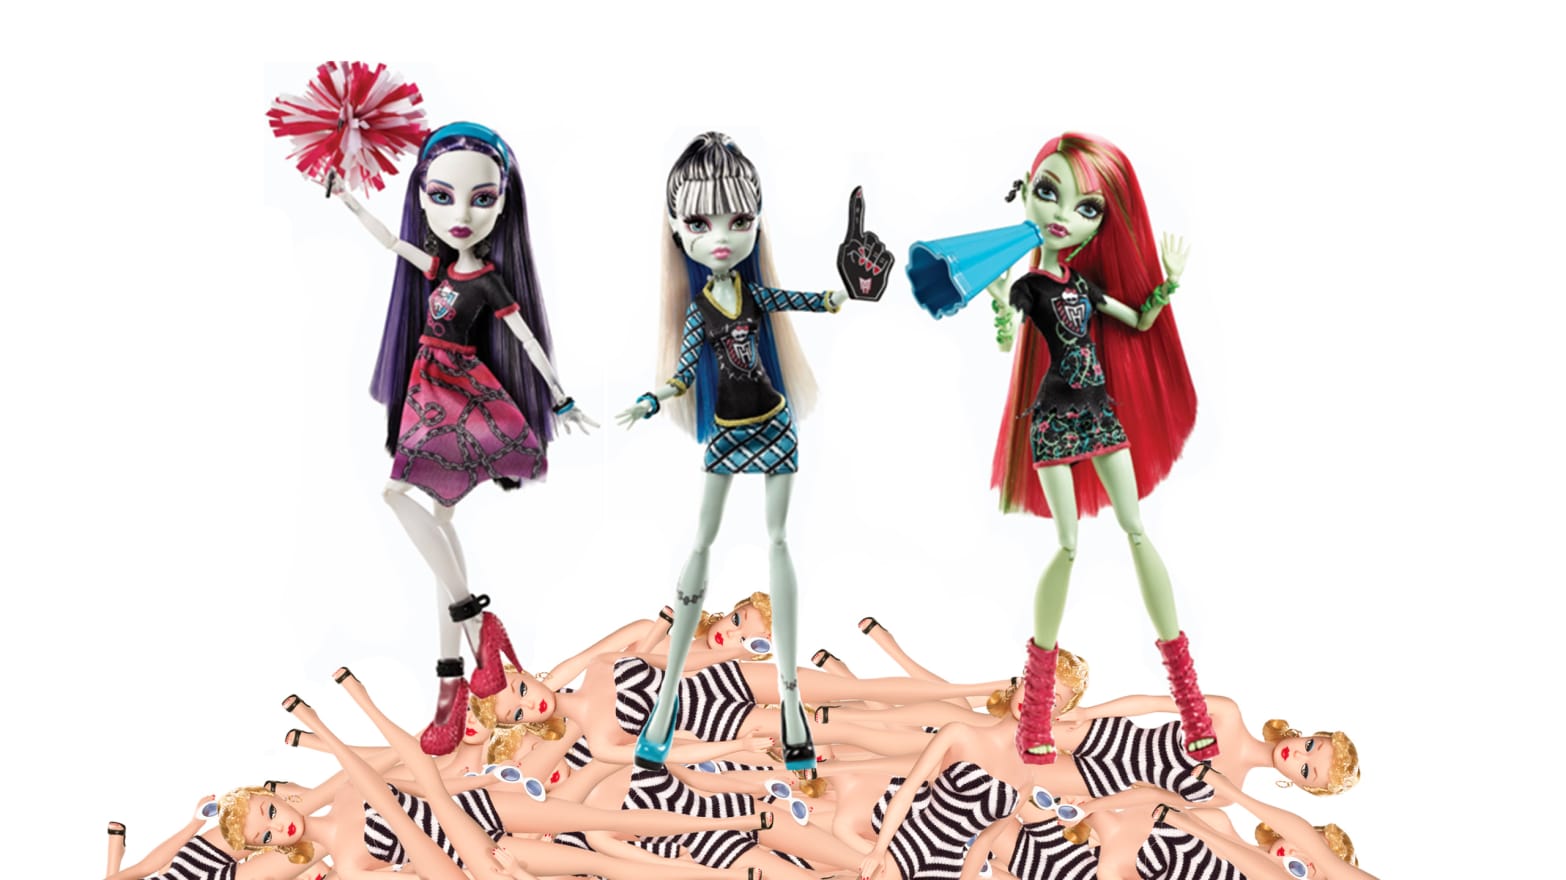 embargo Mundtlig Accord Barbie Is Out, Monster High Is In